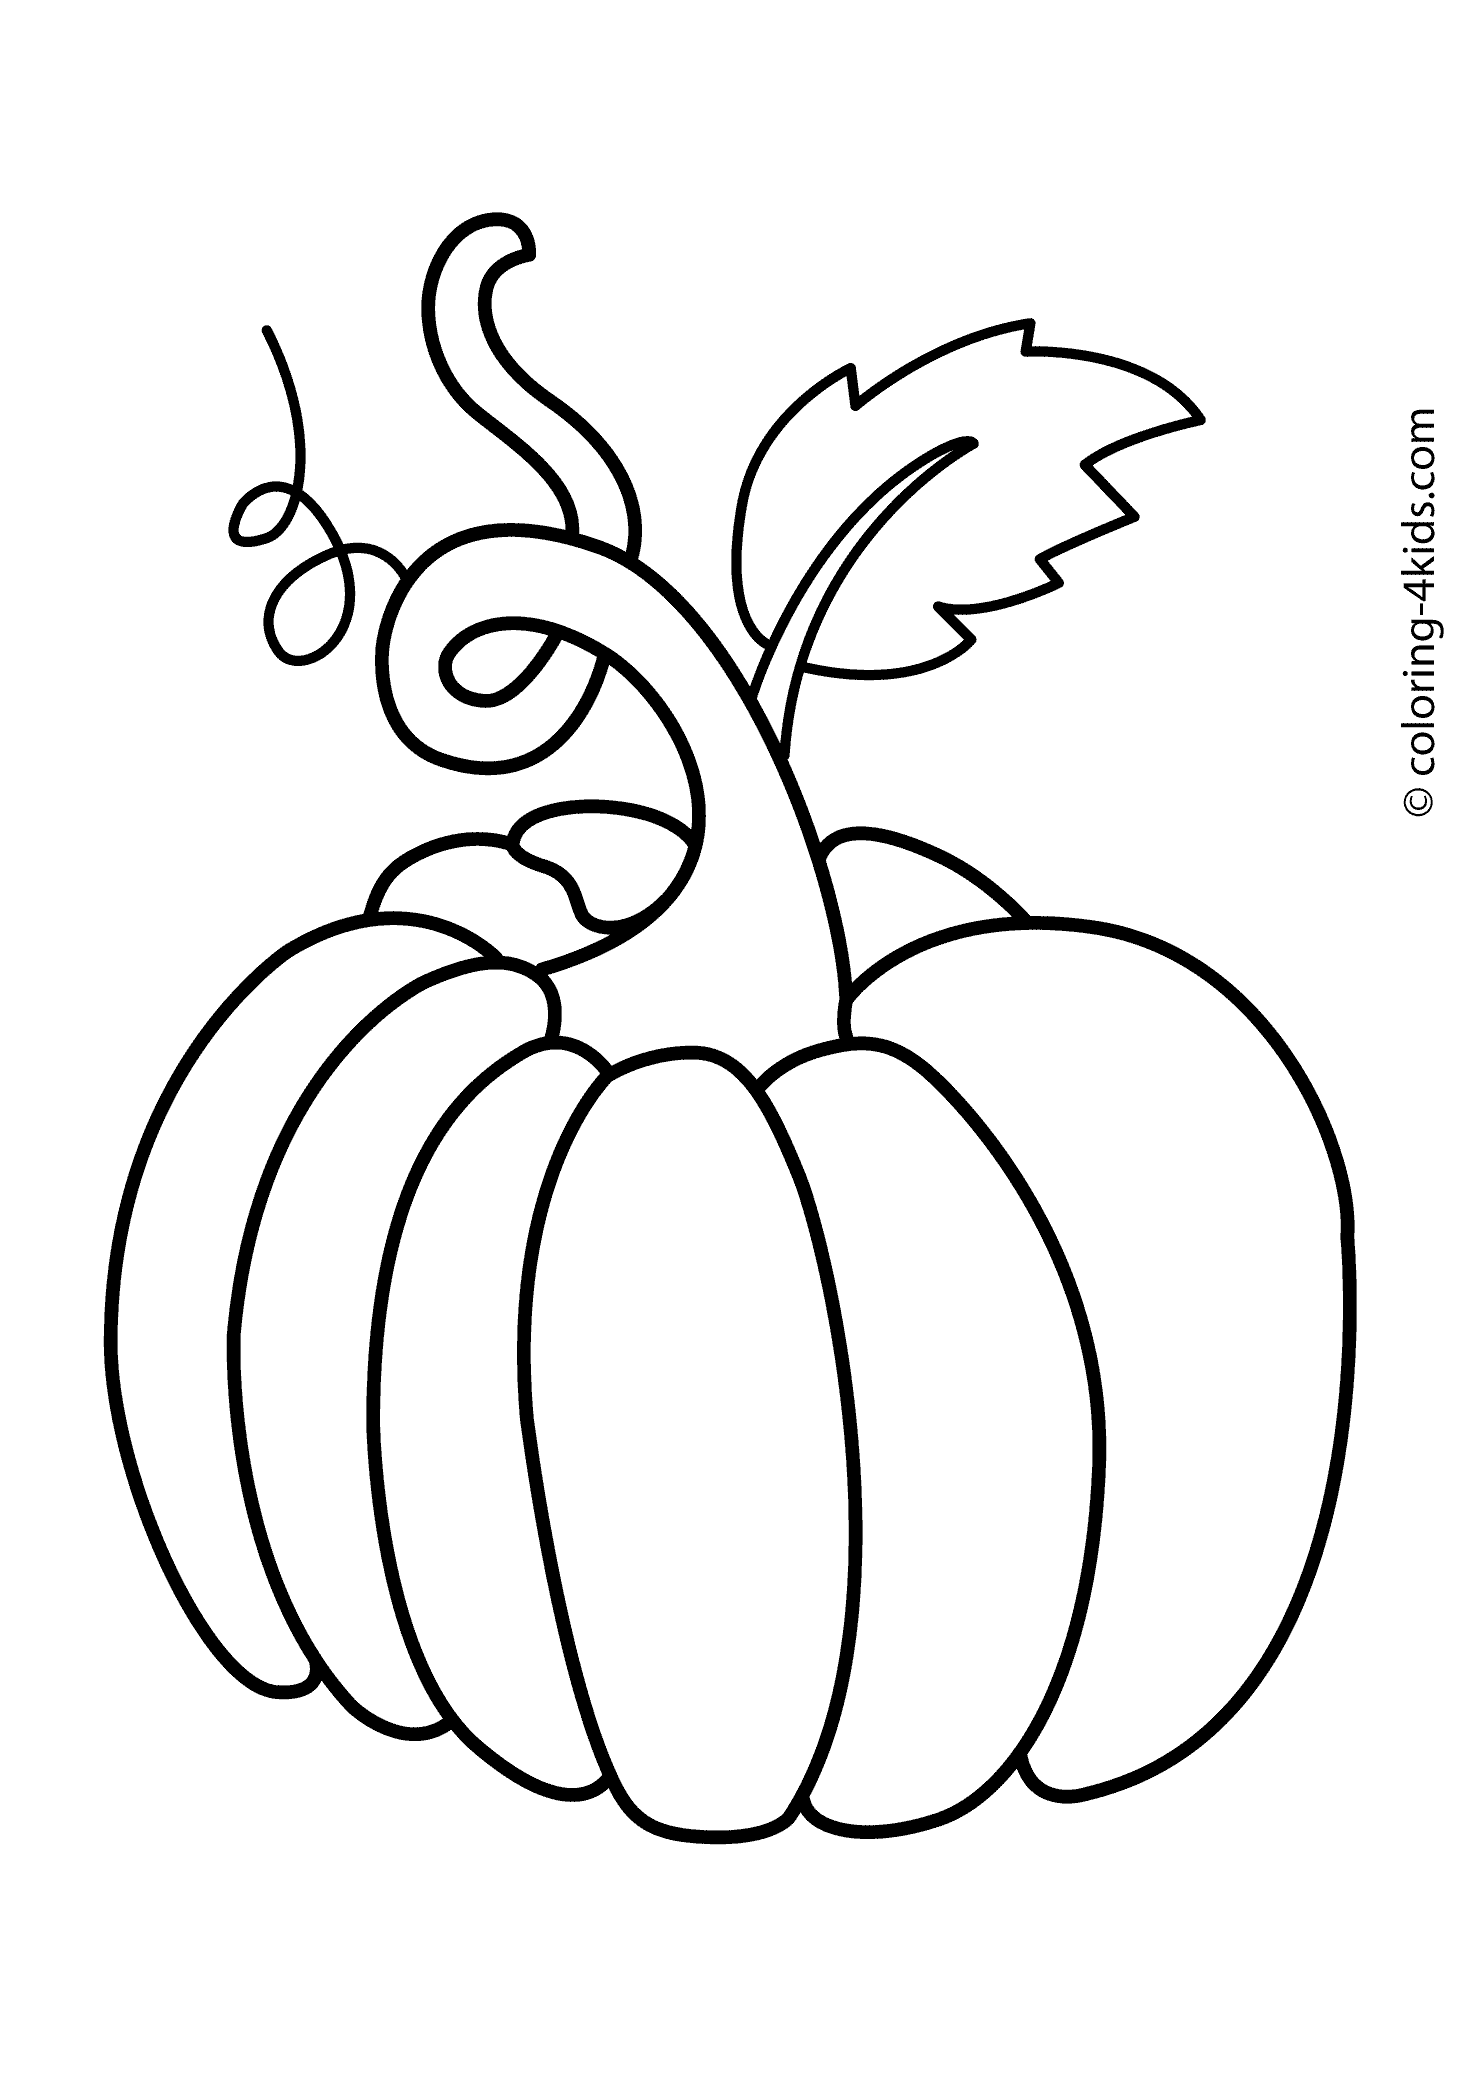 Line Drawings Of Vegetables - ClipArt Best